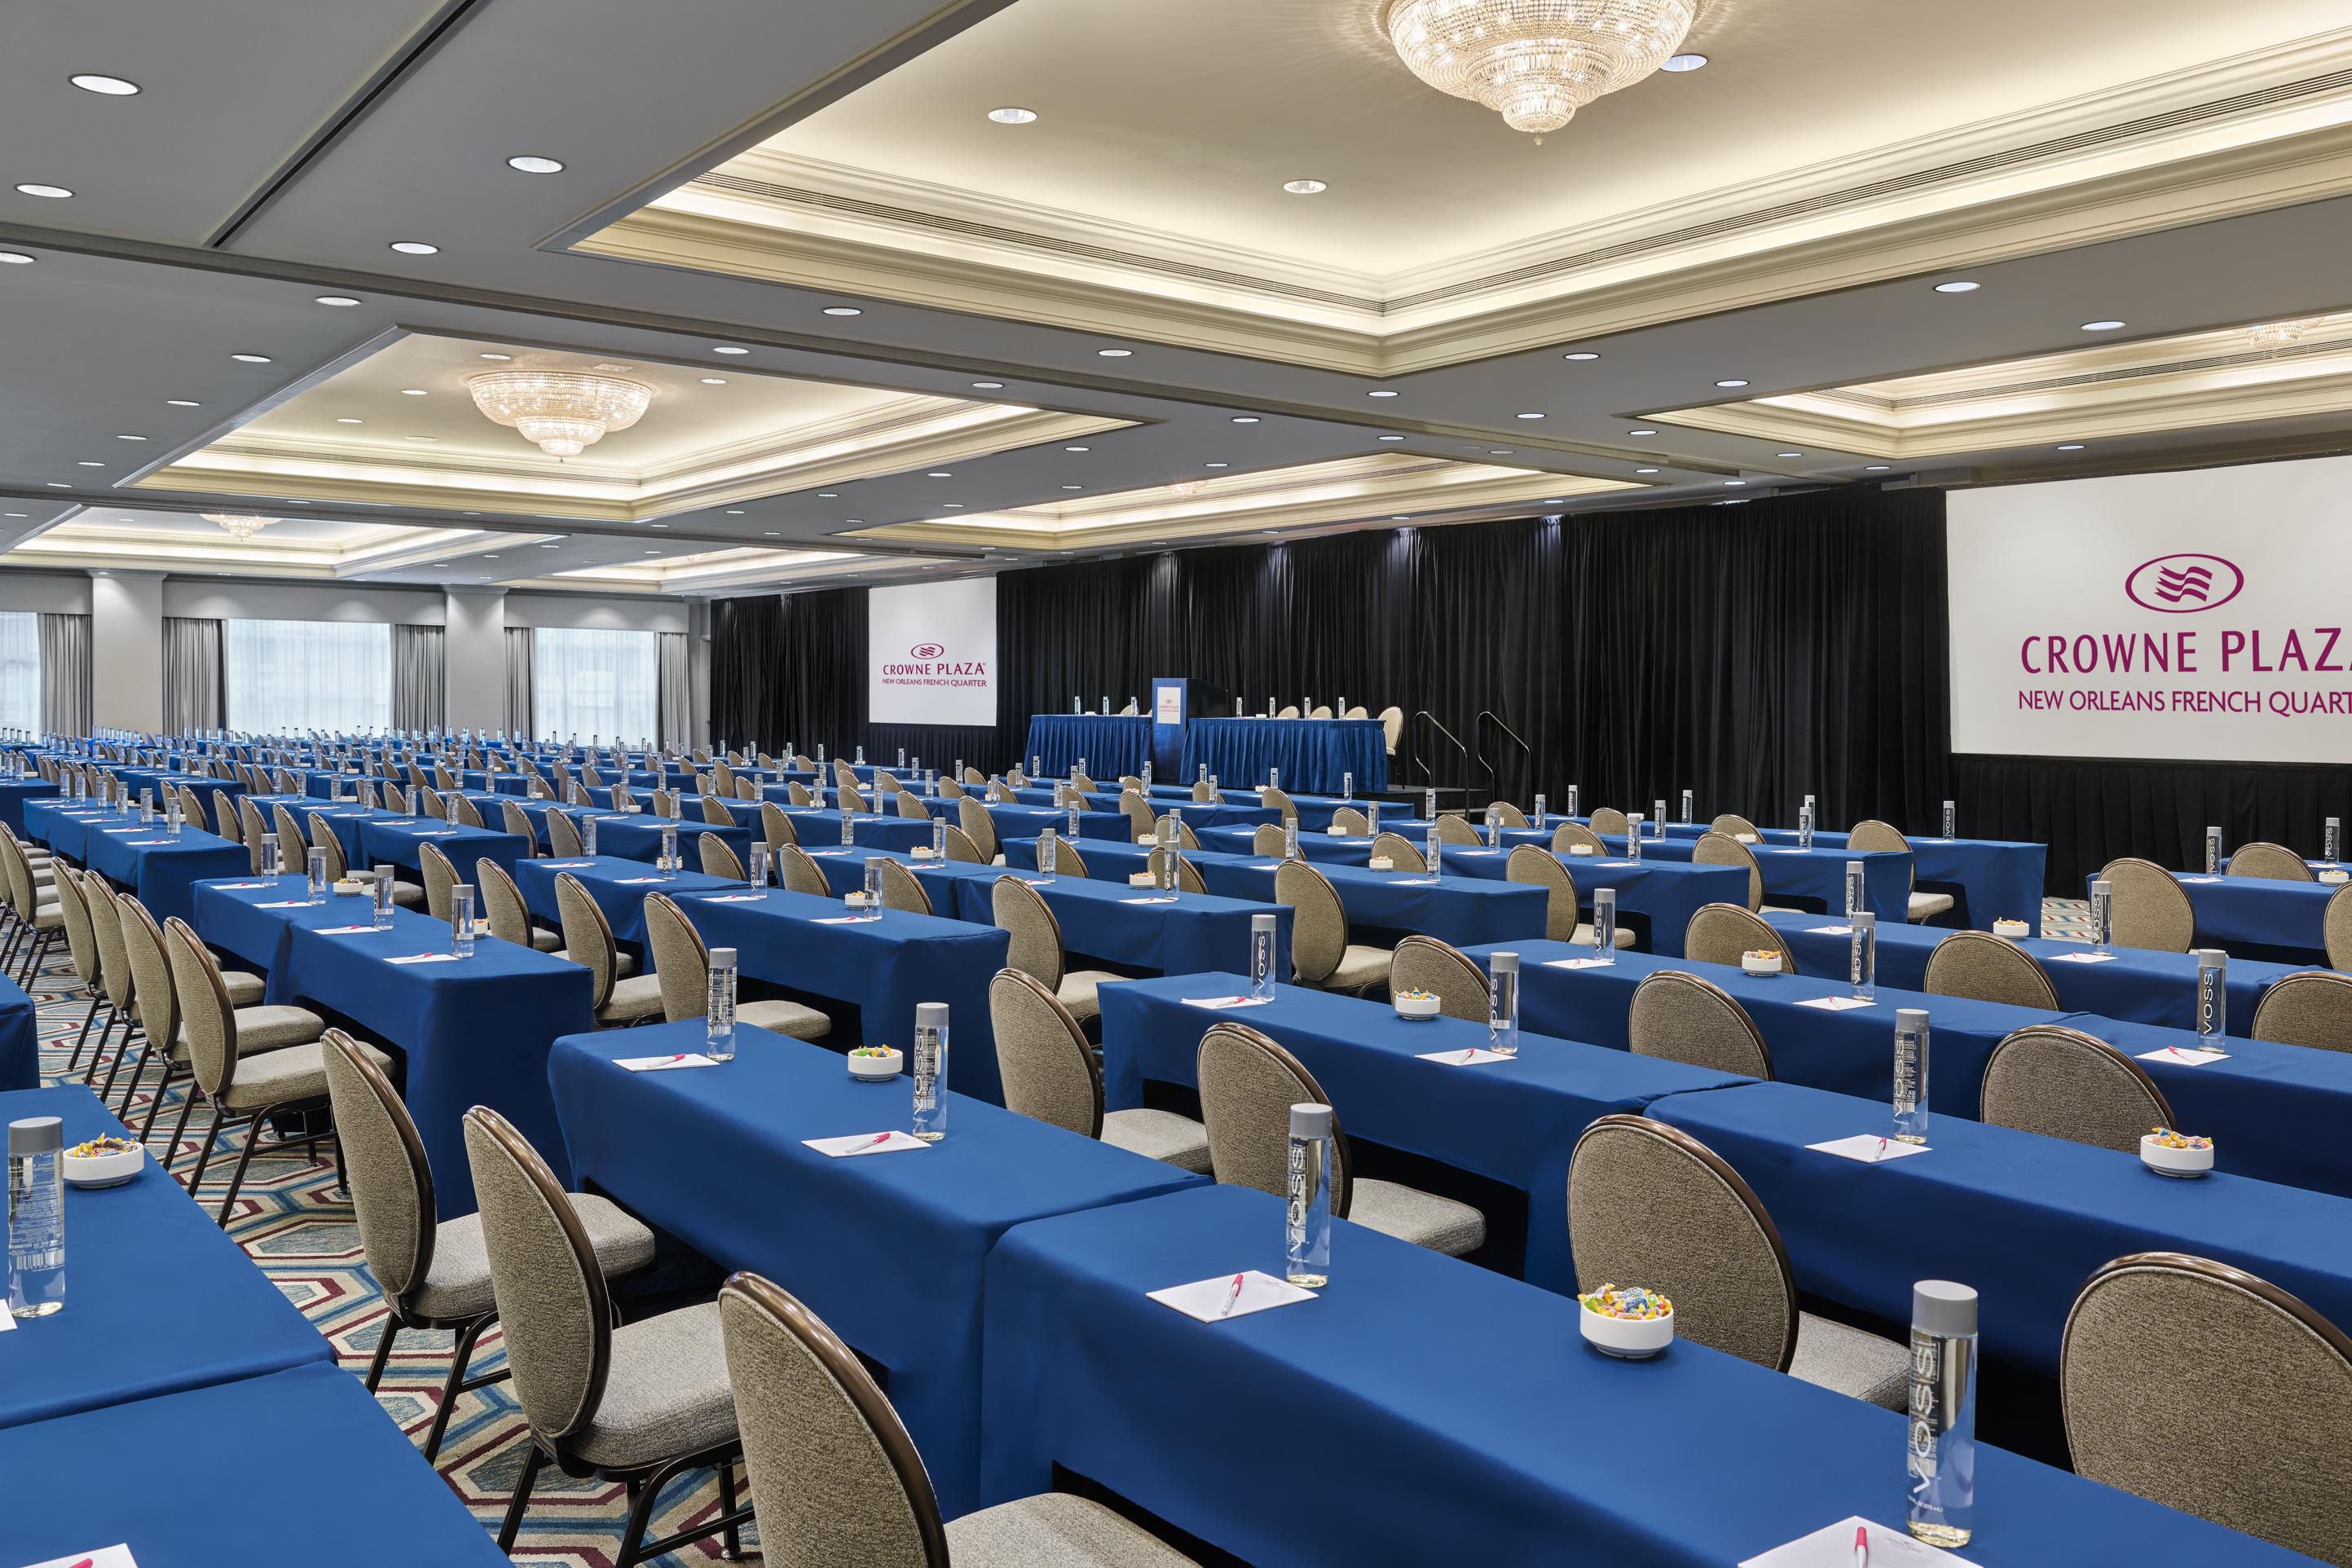 Grand Ballroom in classroom confirguration for up to 500 attendees